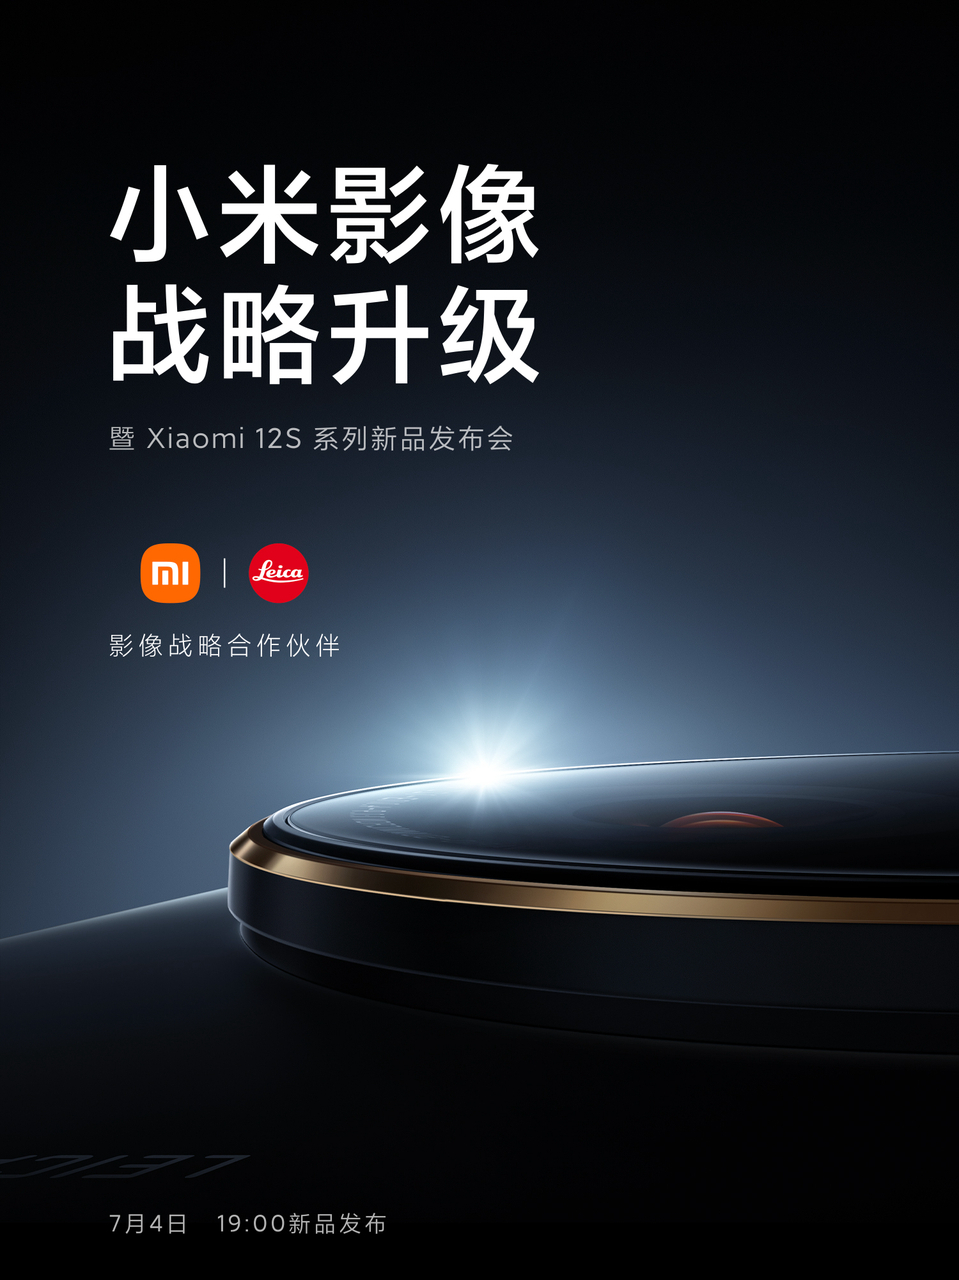 Xiaomi Teases Its Upcoming 12S Series: Leica Camera Goodness